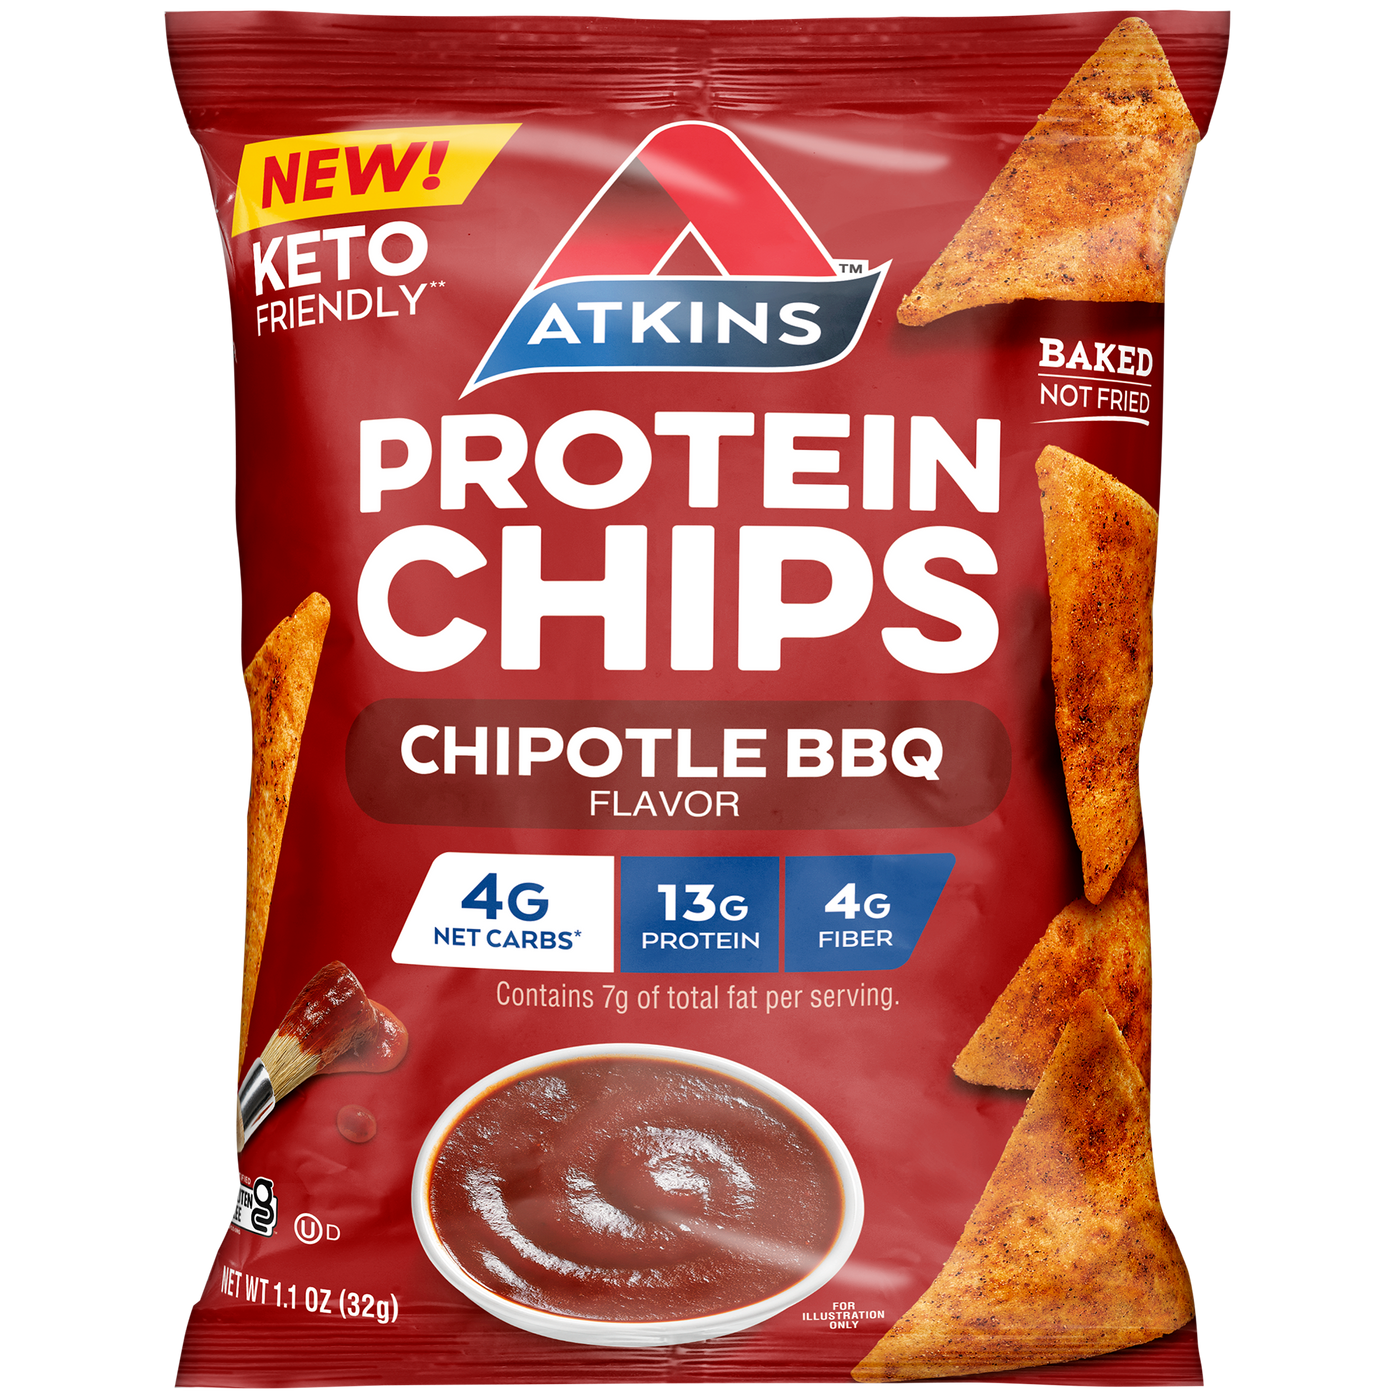 Chipotle BBQ Snack Protein Chips